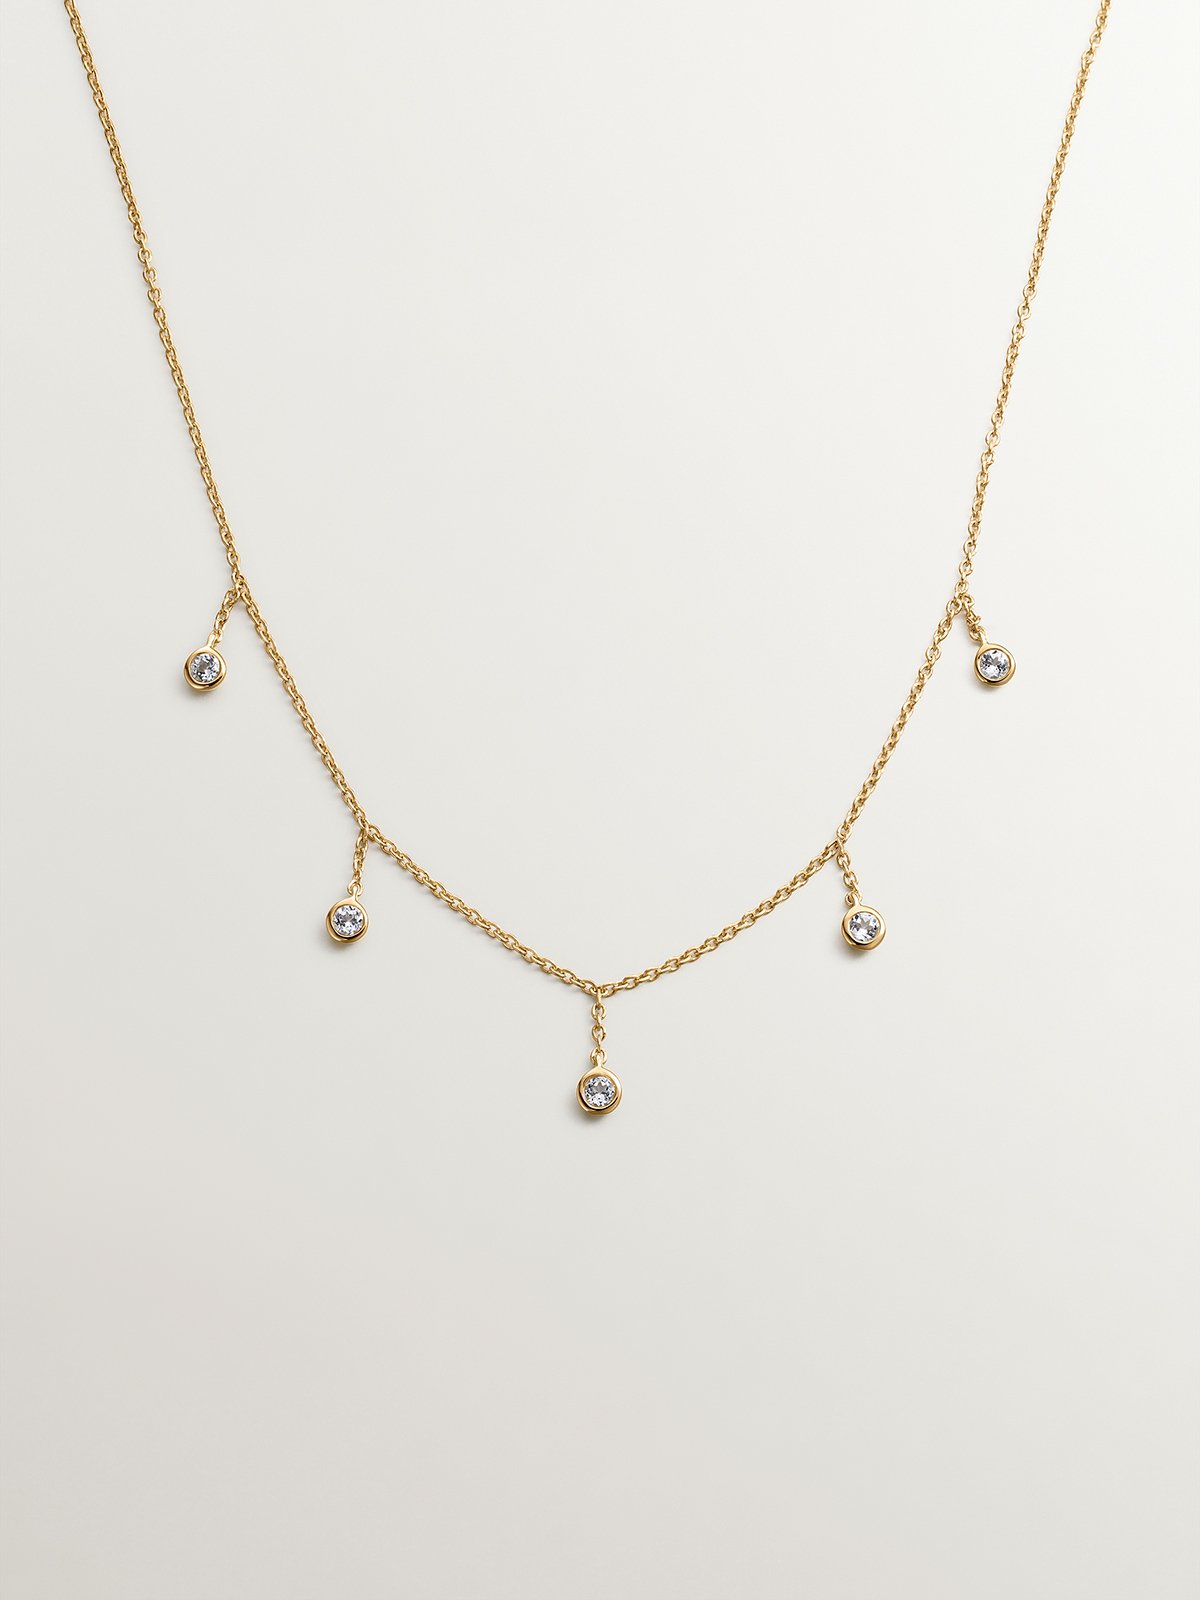 925 silver necklace bathed in 18K yellow gold with white topaz stones